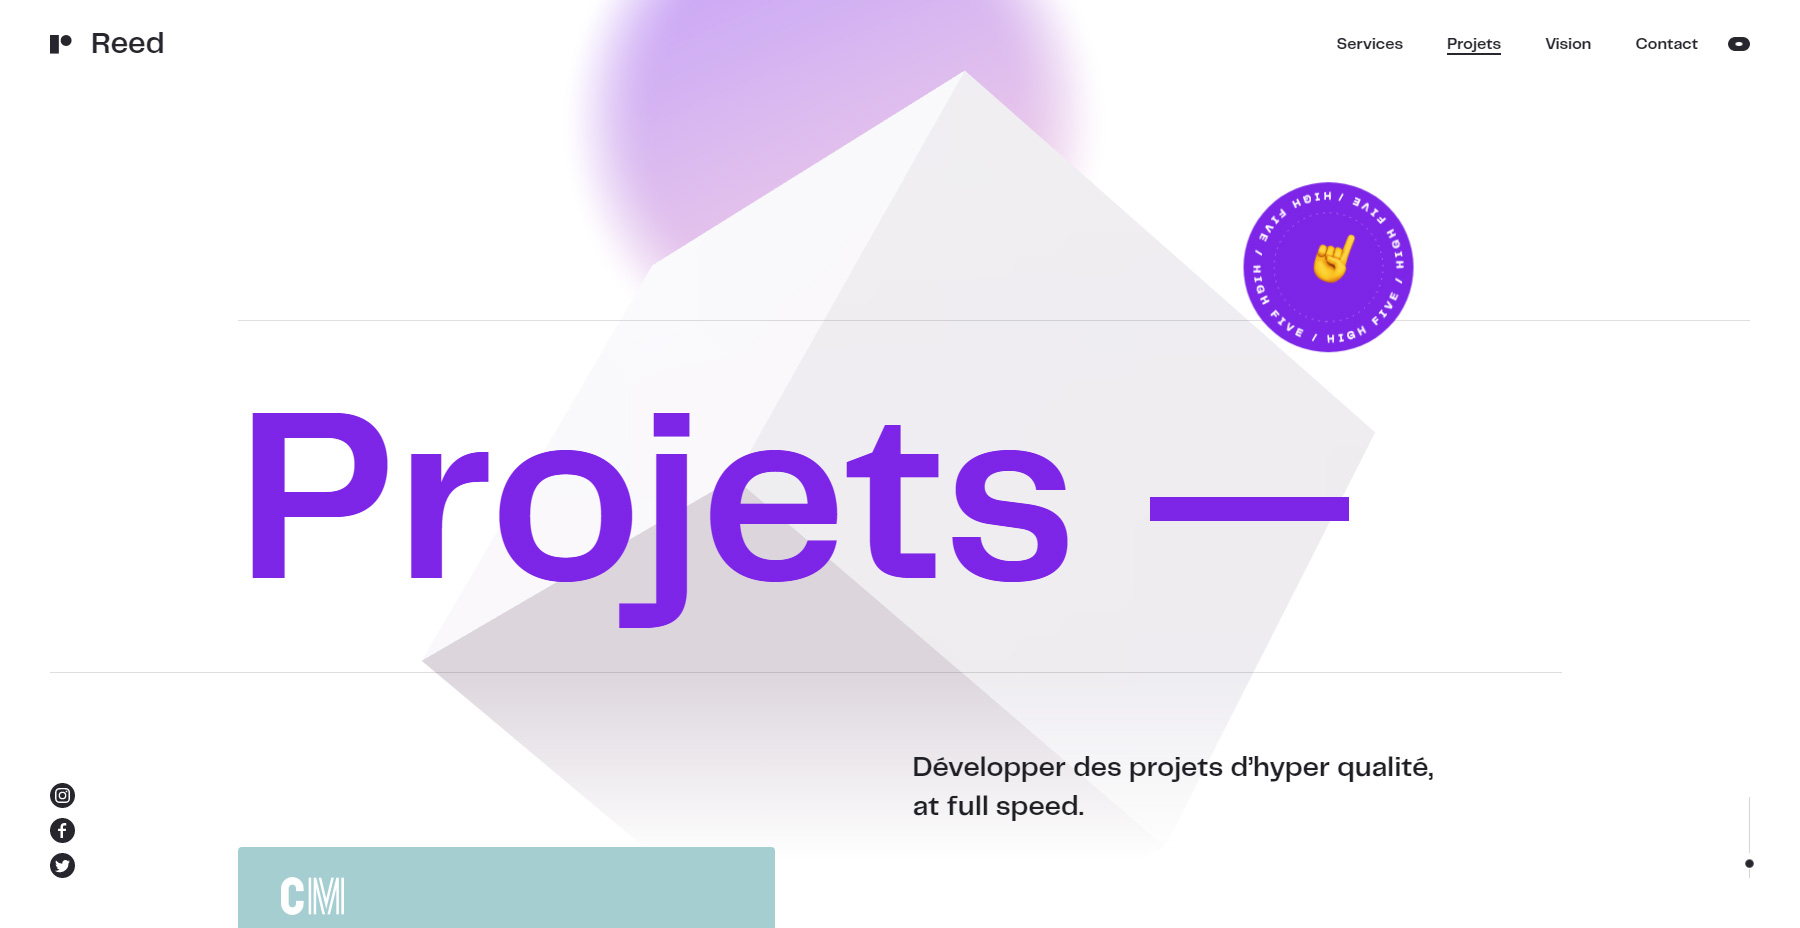 Reed.be - Website of the Day